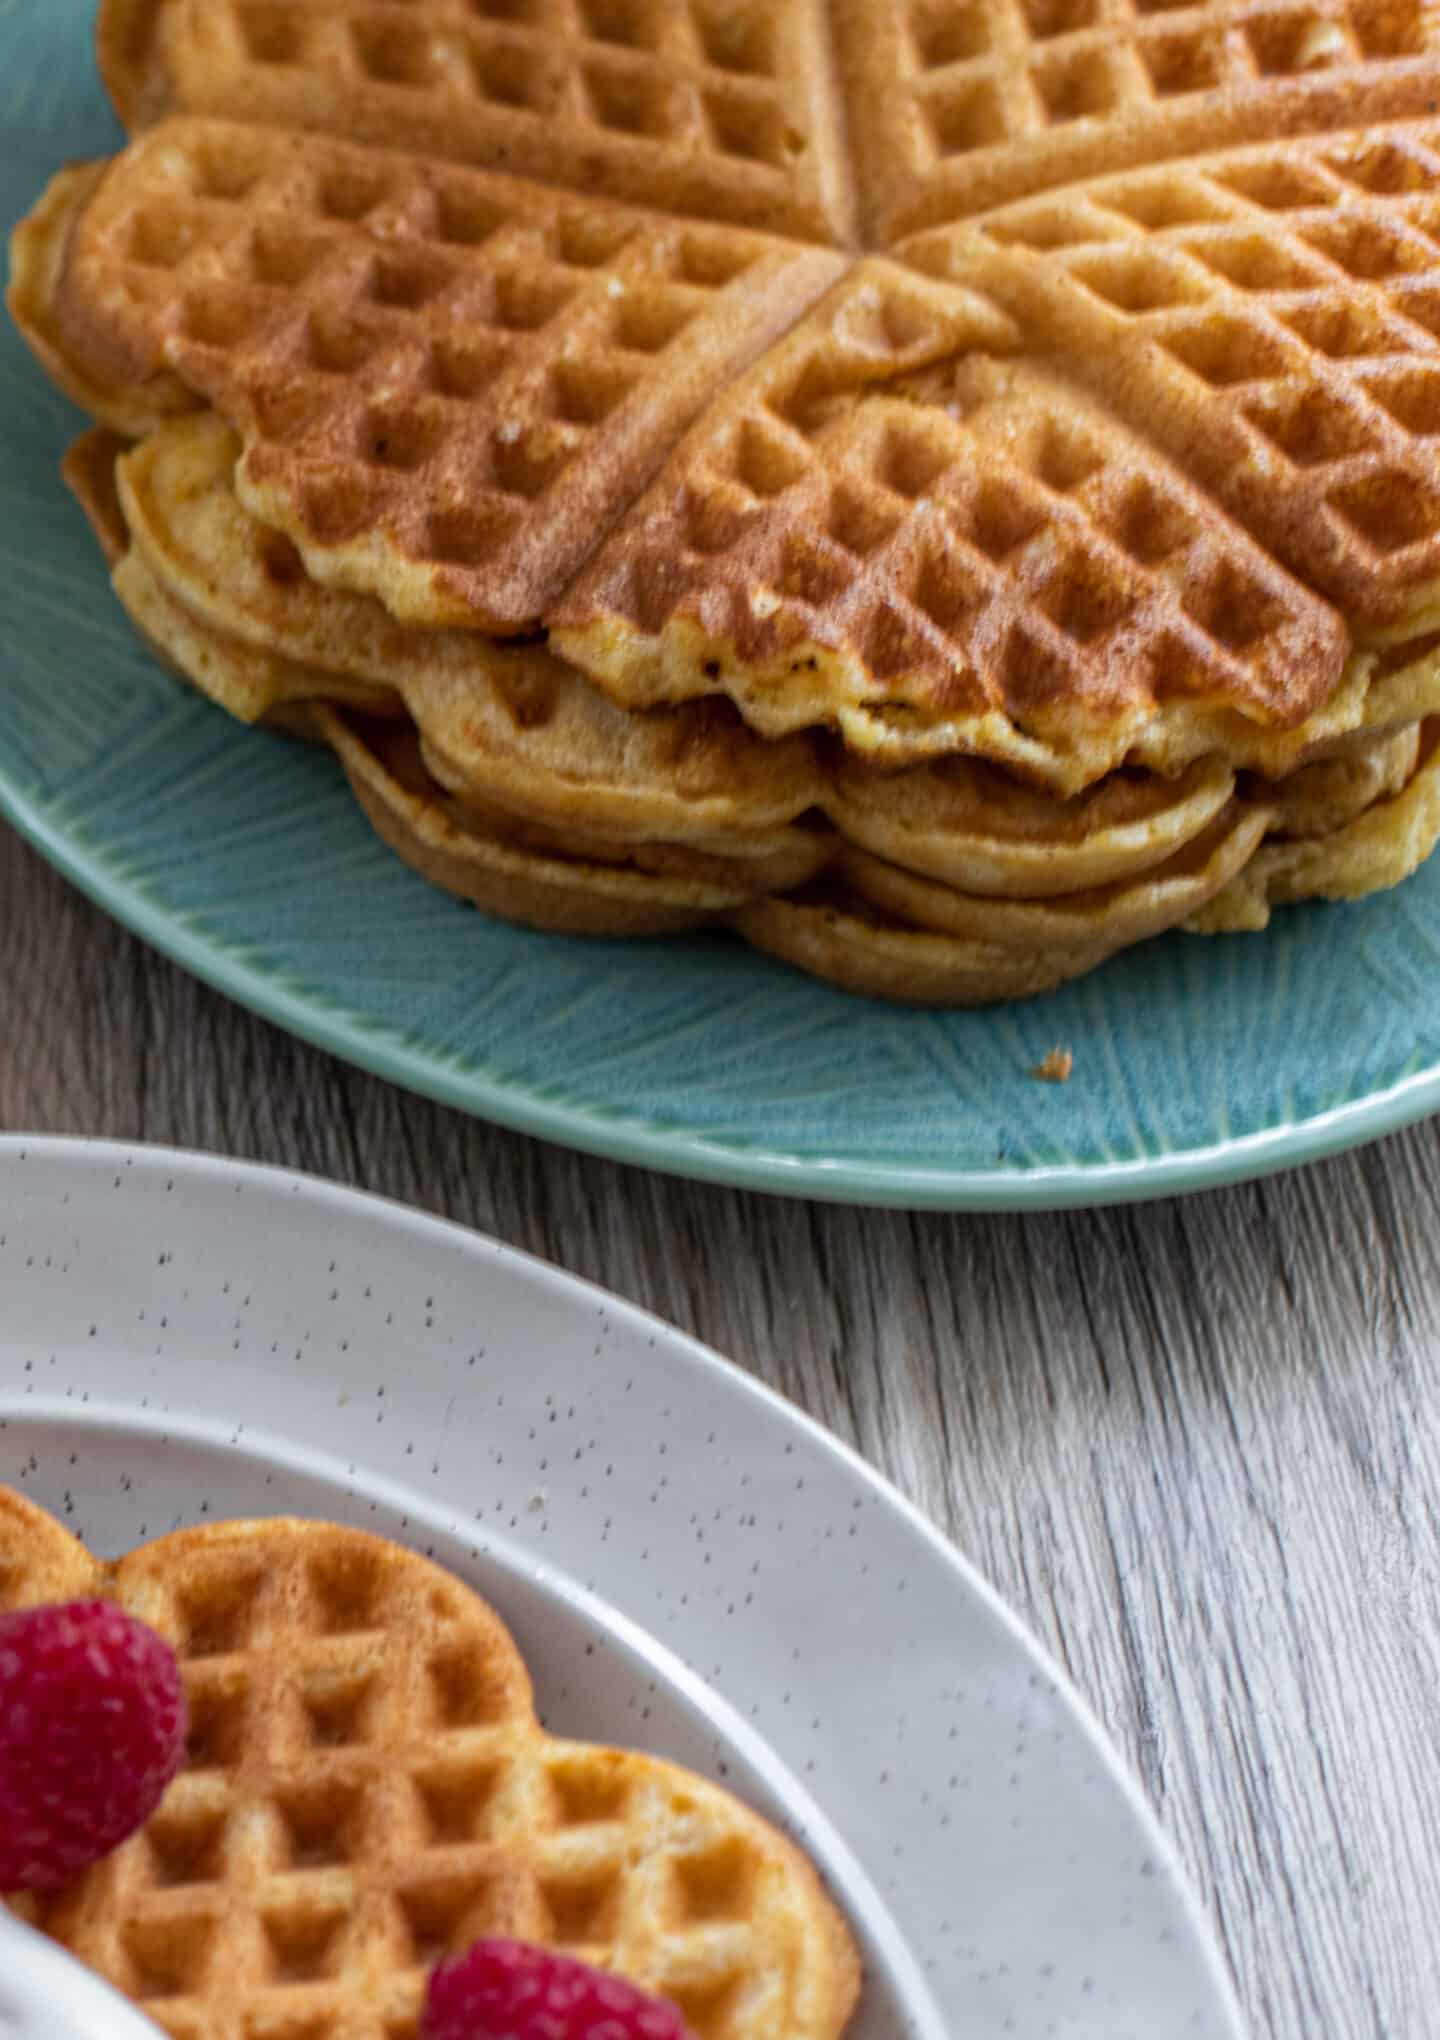 A stack of cornmeal waffles with raspberries